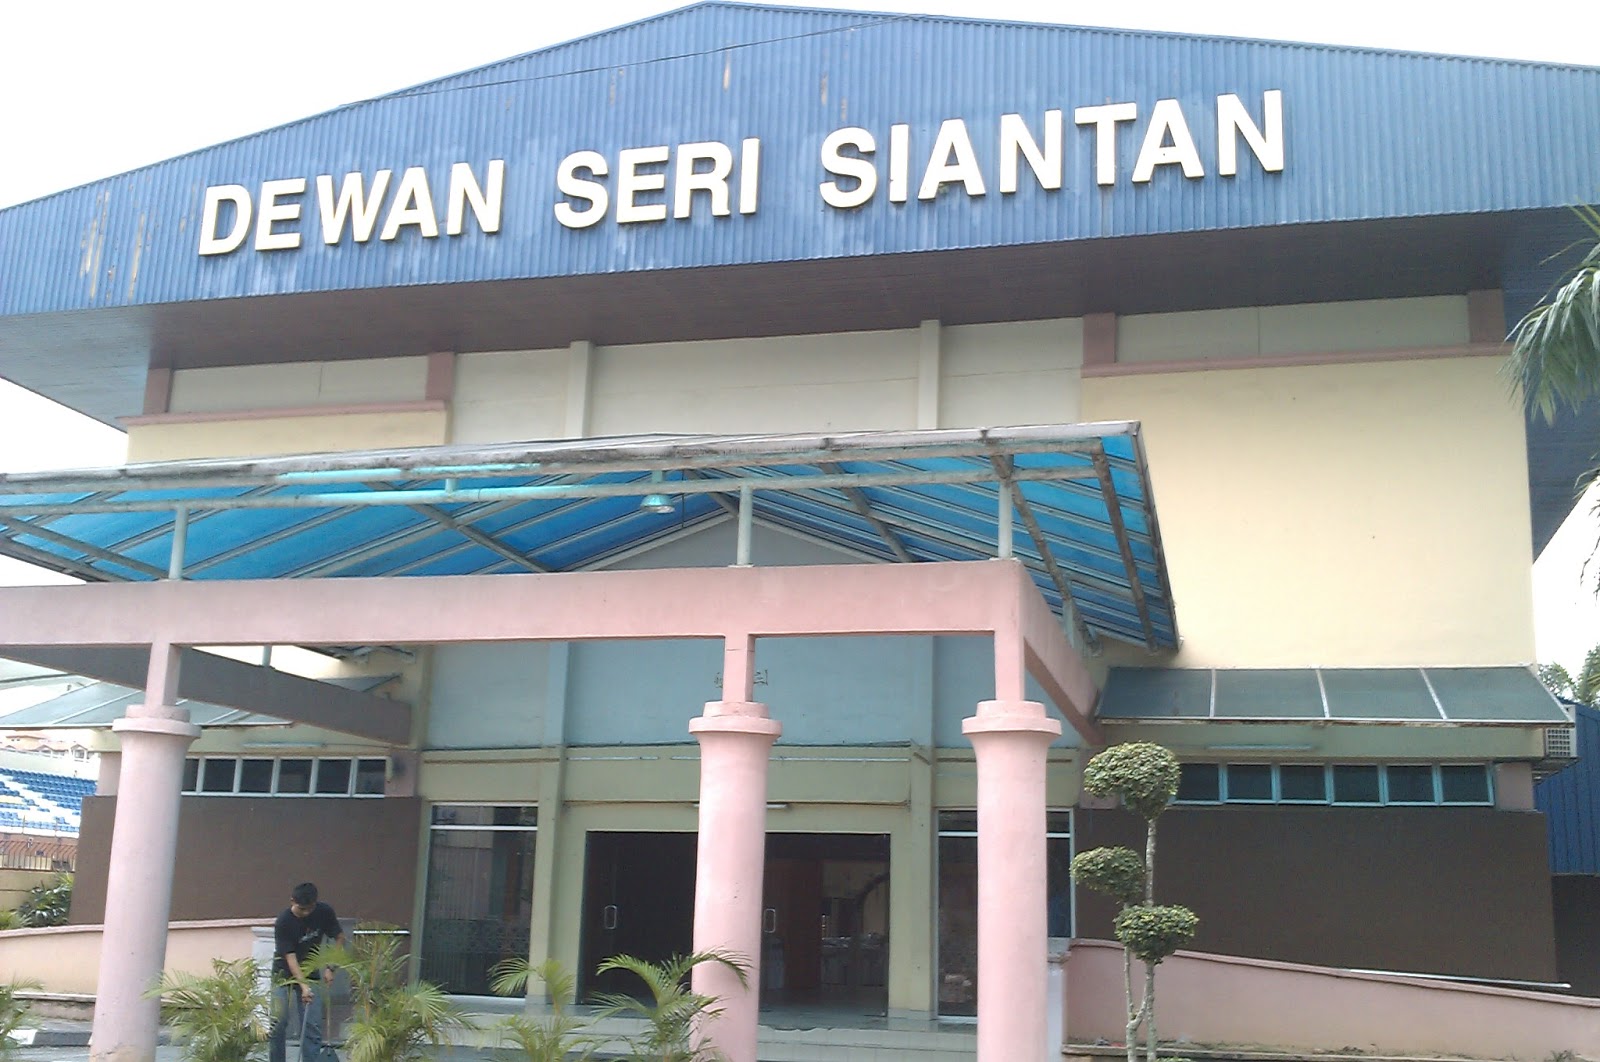 Dewan Sri Siantan Selayang - From a different point of view: Activemind